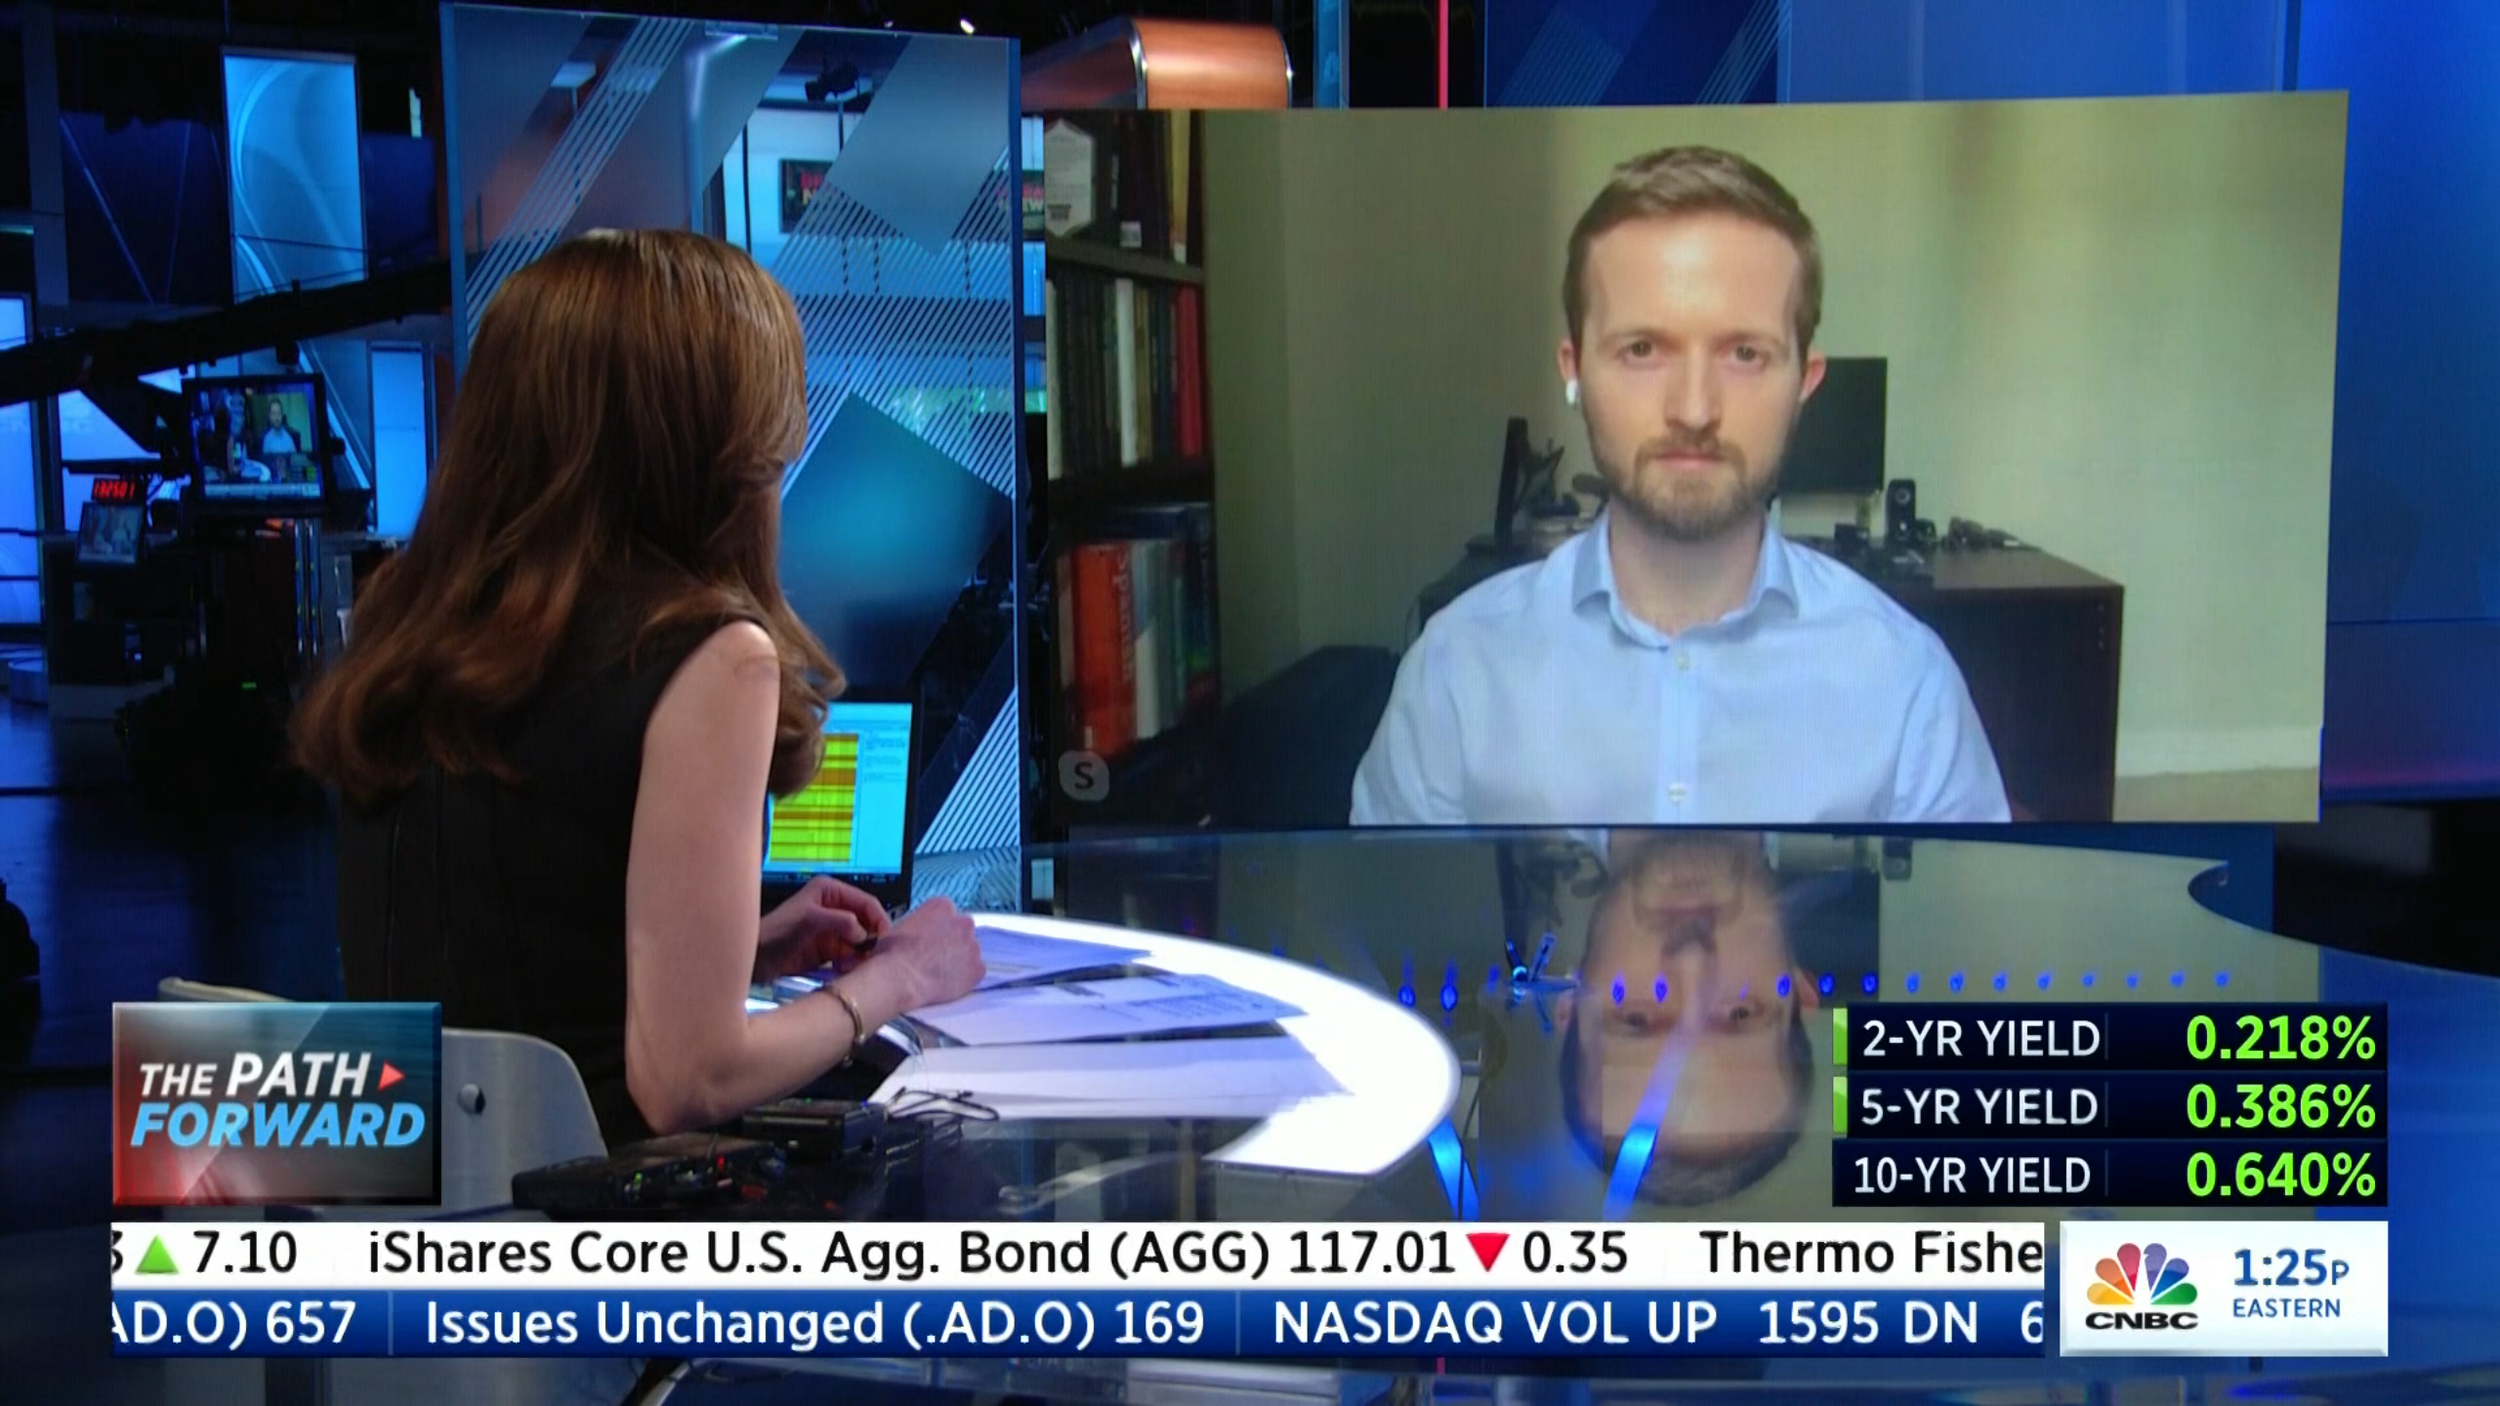  Speaking to CNBC from my home in London during the COVID-19 pandemic 